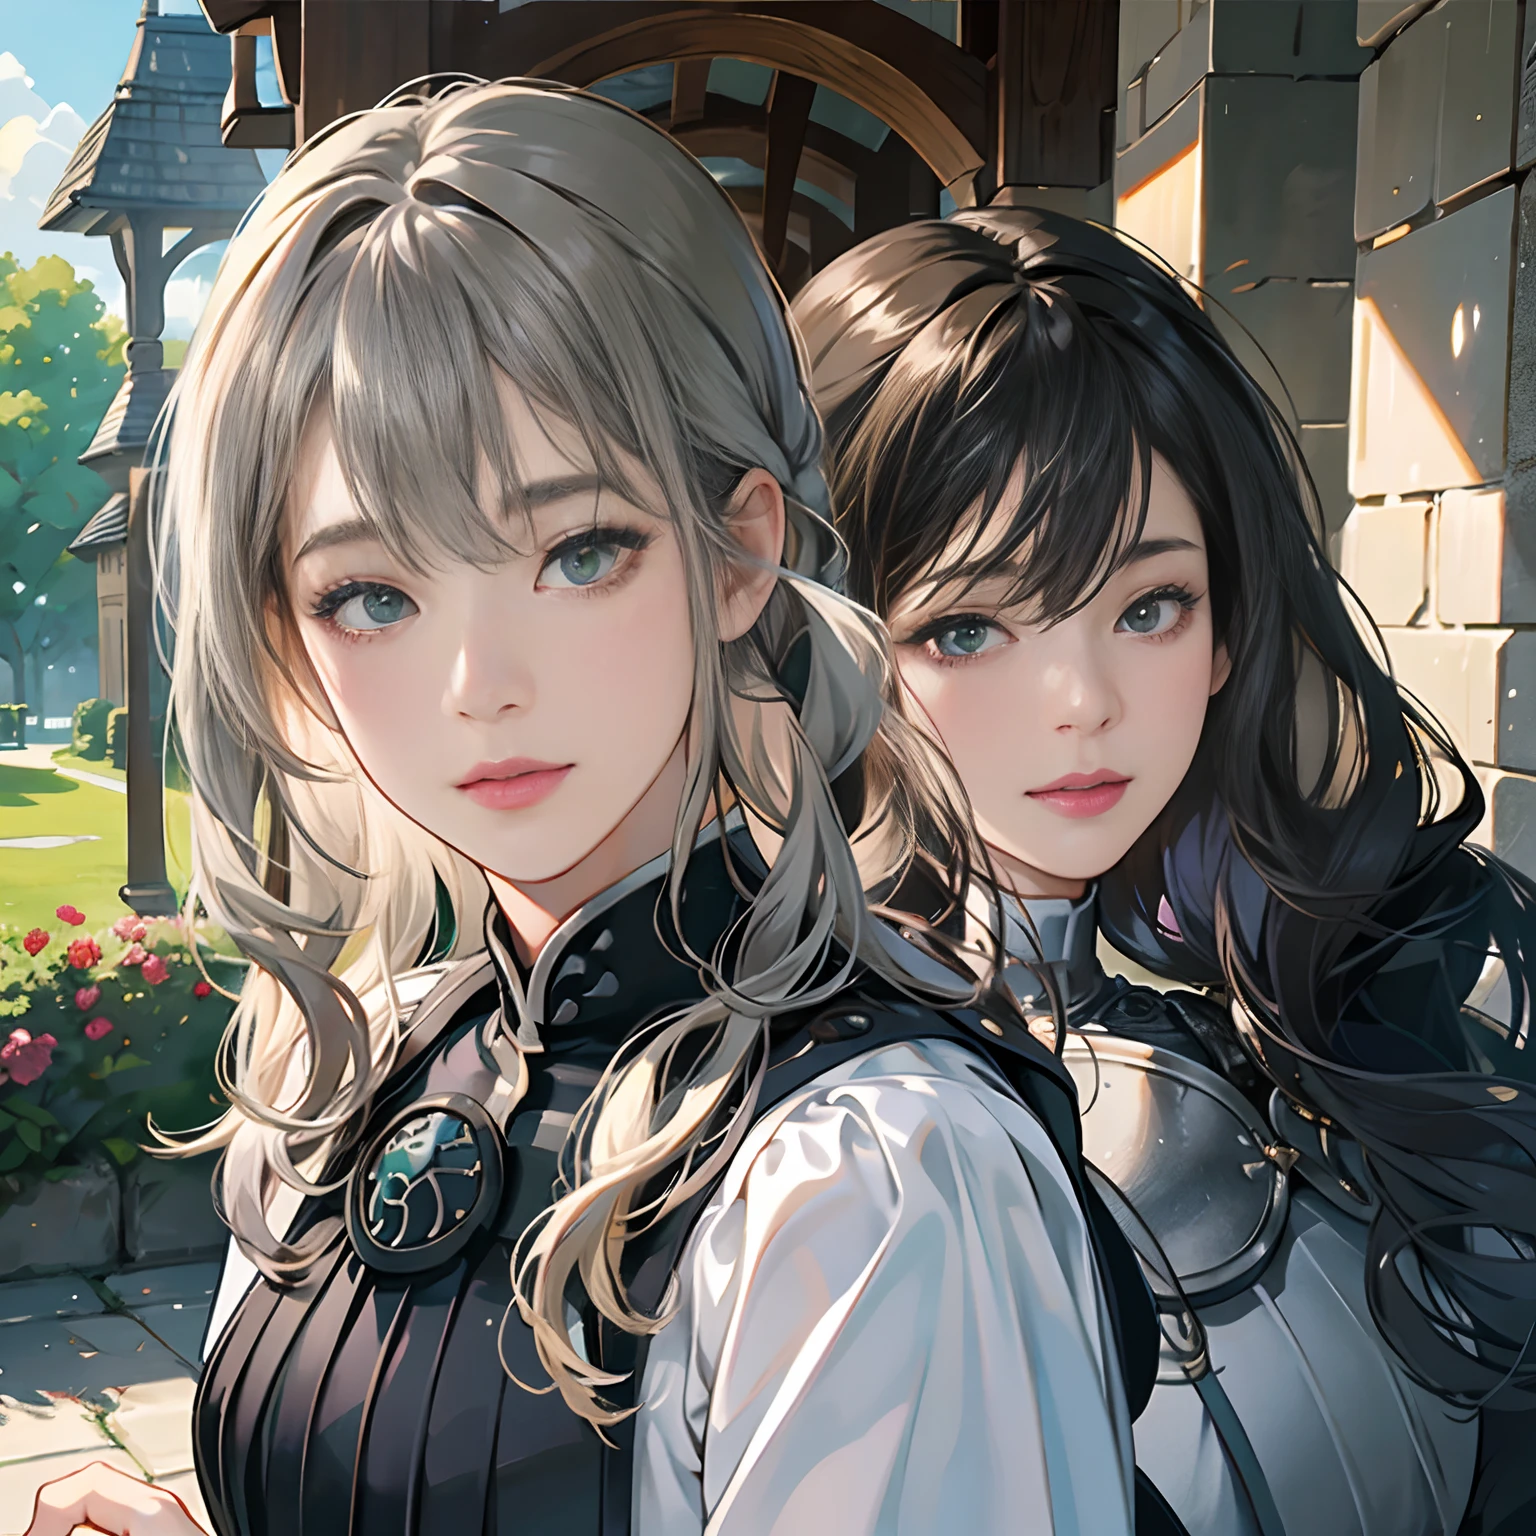 Women in Their 20s, Fantasia、offcial art, unity 8k wall paper, ultra-detailliert, beautifly、Aesthetic, ​masterpiece, top-quality, Photorealsitic, Castle Guard、Full Armor Knight:2.0、Black-silver armor、Black-silver breastplate、Knights、A dark-haired、bluish green eyes、Braided hair、Braids:1.5、depth of fields, Fantastic atmosphere, Calm palette, tranquil mood, Soft shading、Castle Gate、Rampart、Beautiful Landscapes、bbw、very large breast、plump figure